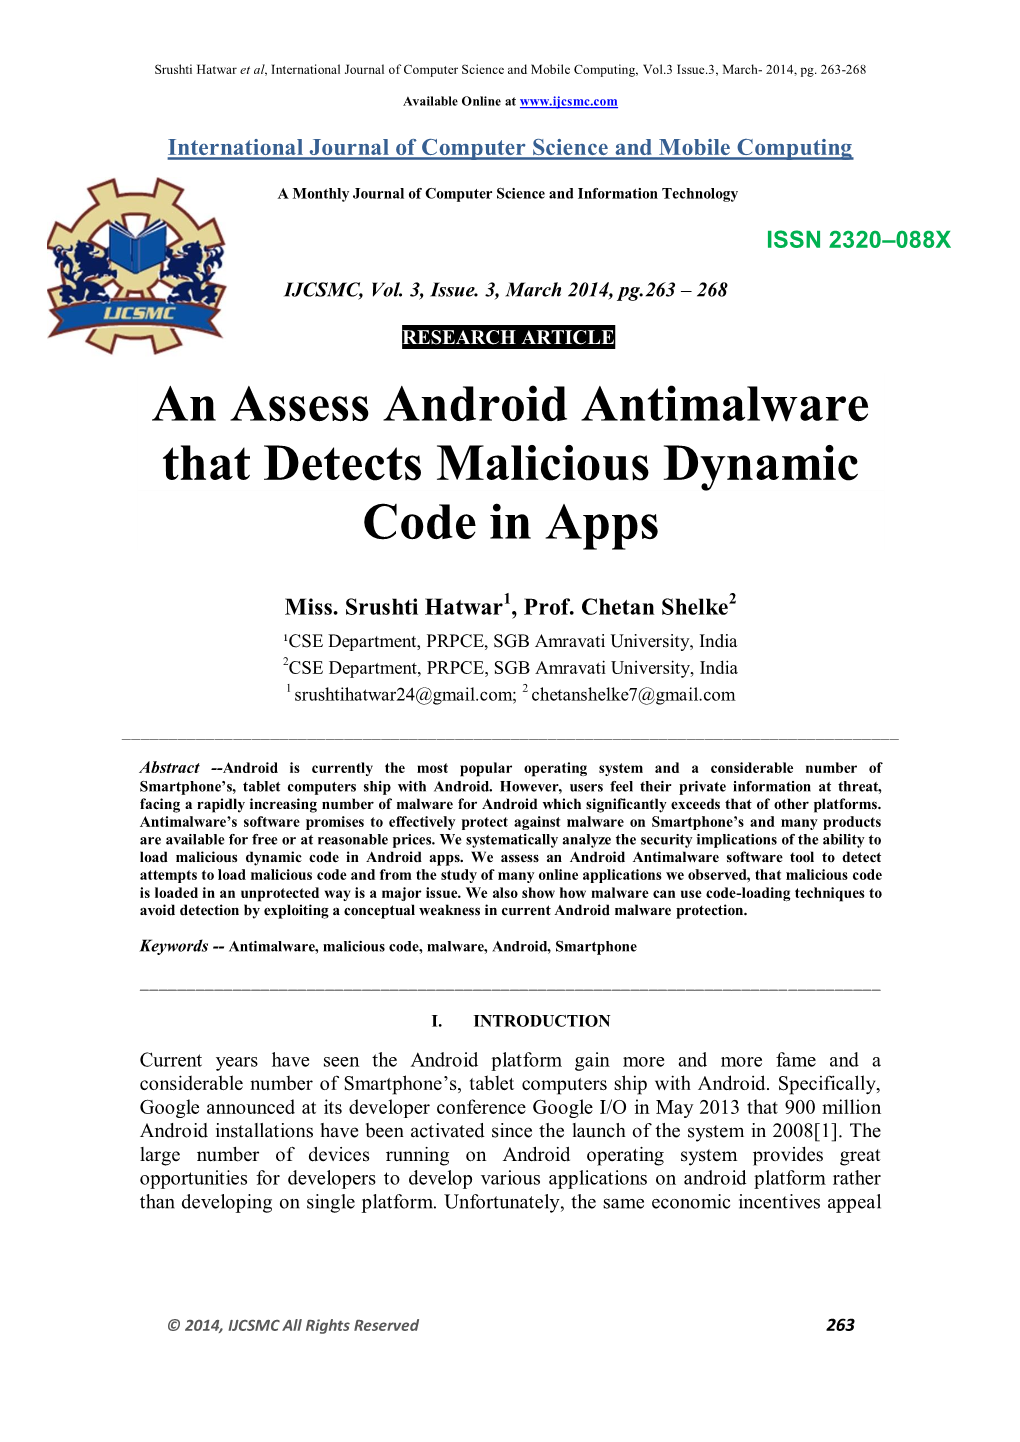 An Assess Android Antimalware That Detects Malicious Dynamic Code in Apps